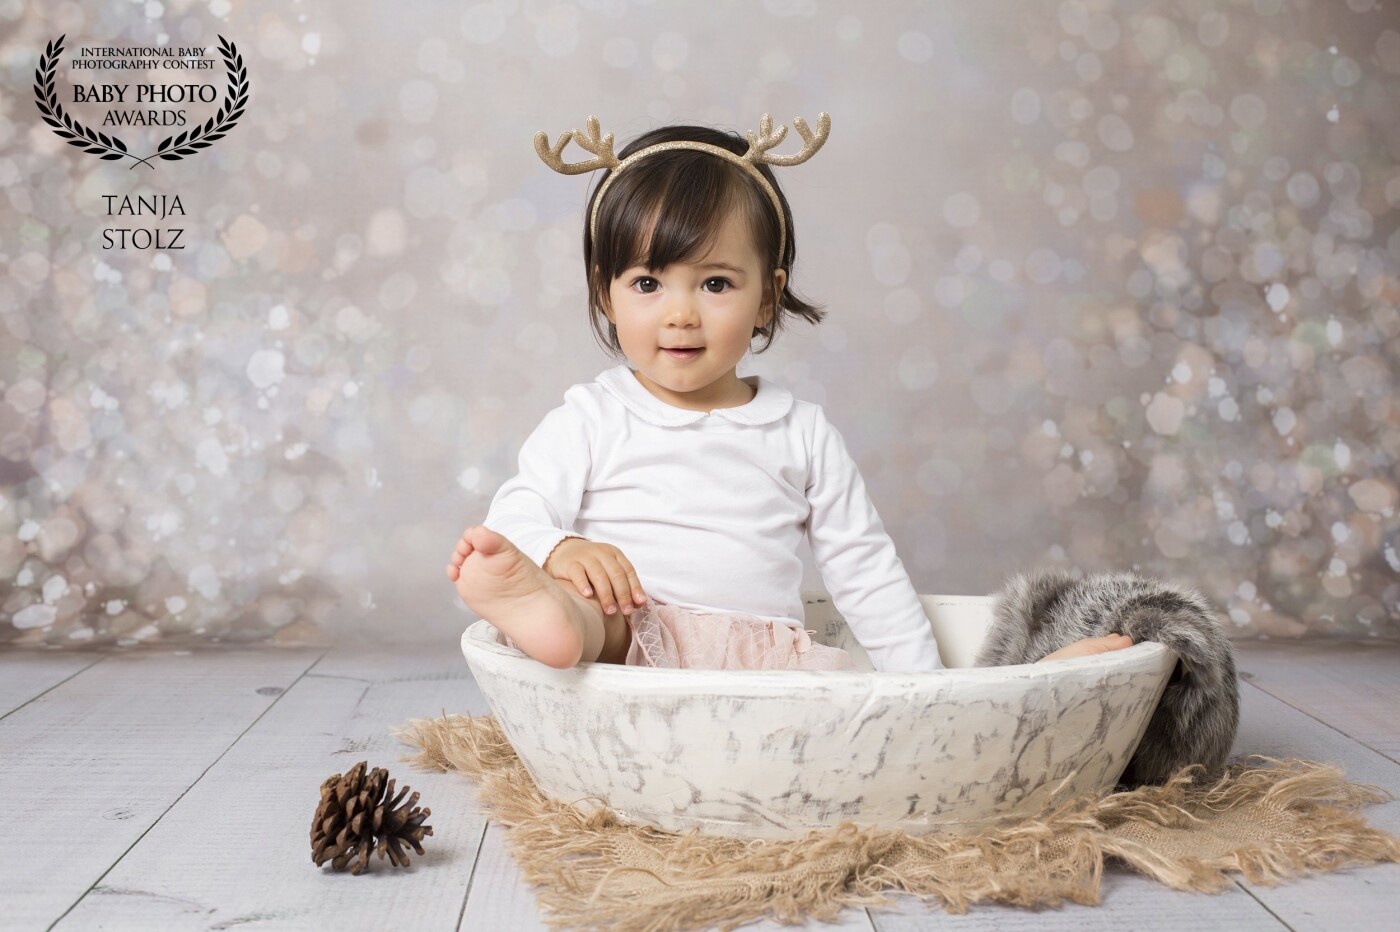 This little girl came to my x-mas minisessions this year. Which was fantastic! I invited 30 families into my cosy baby photo studio and had so much fun! I'm an absolute christmas-lover... When it comes to x-mas-shootings I prefer golden, brown and white colours. Like in this picture. 